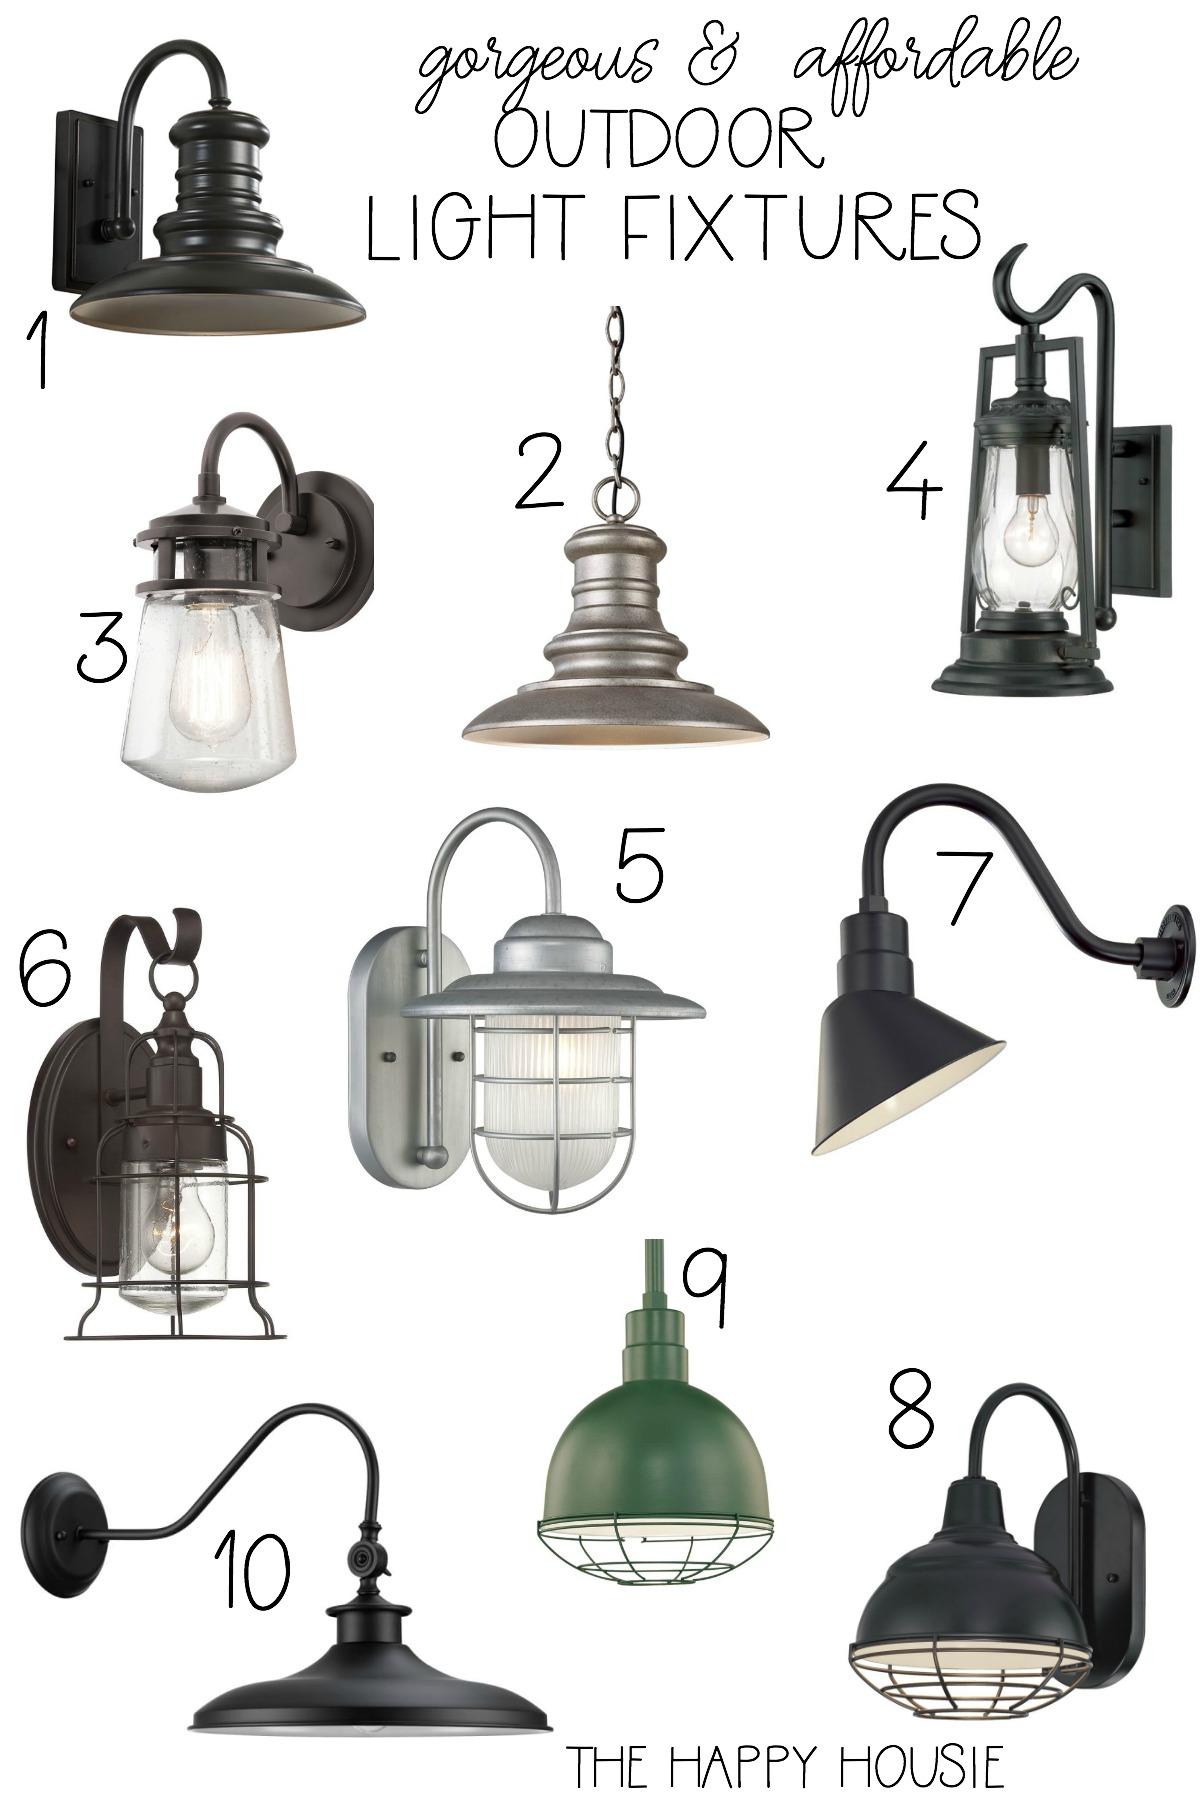 Gorgeous & Affordable Outdoor Light Fixtures poster.